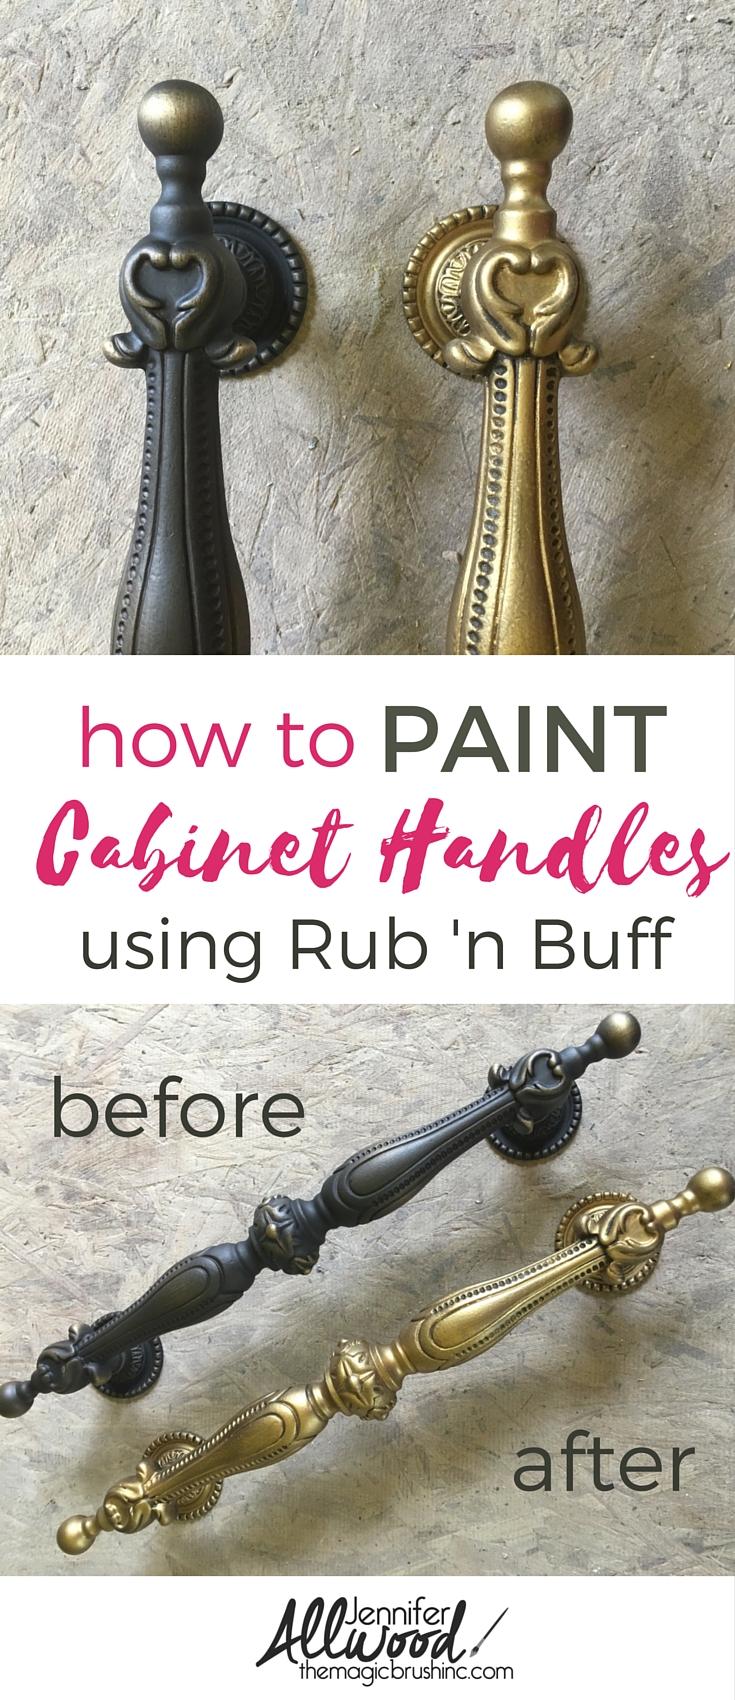 How to Update Handles with Rub 'n Buff - Weekend Craft